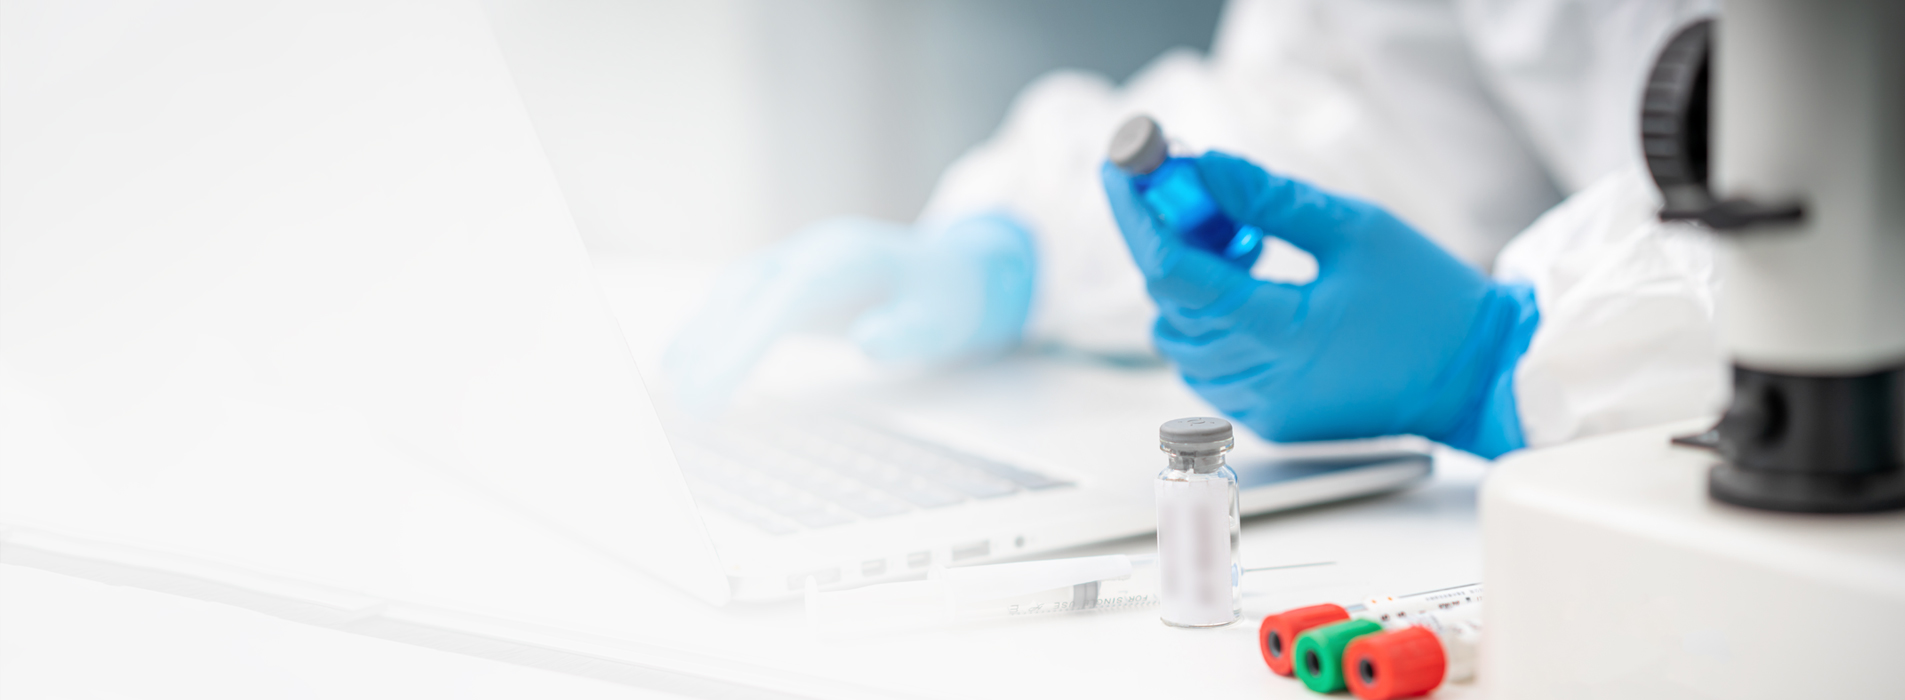 Close up of a lab technician's hands with gloves on using a laptop and holding a vile with medication